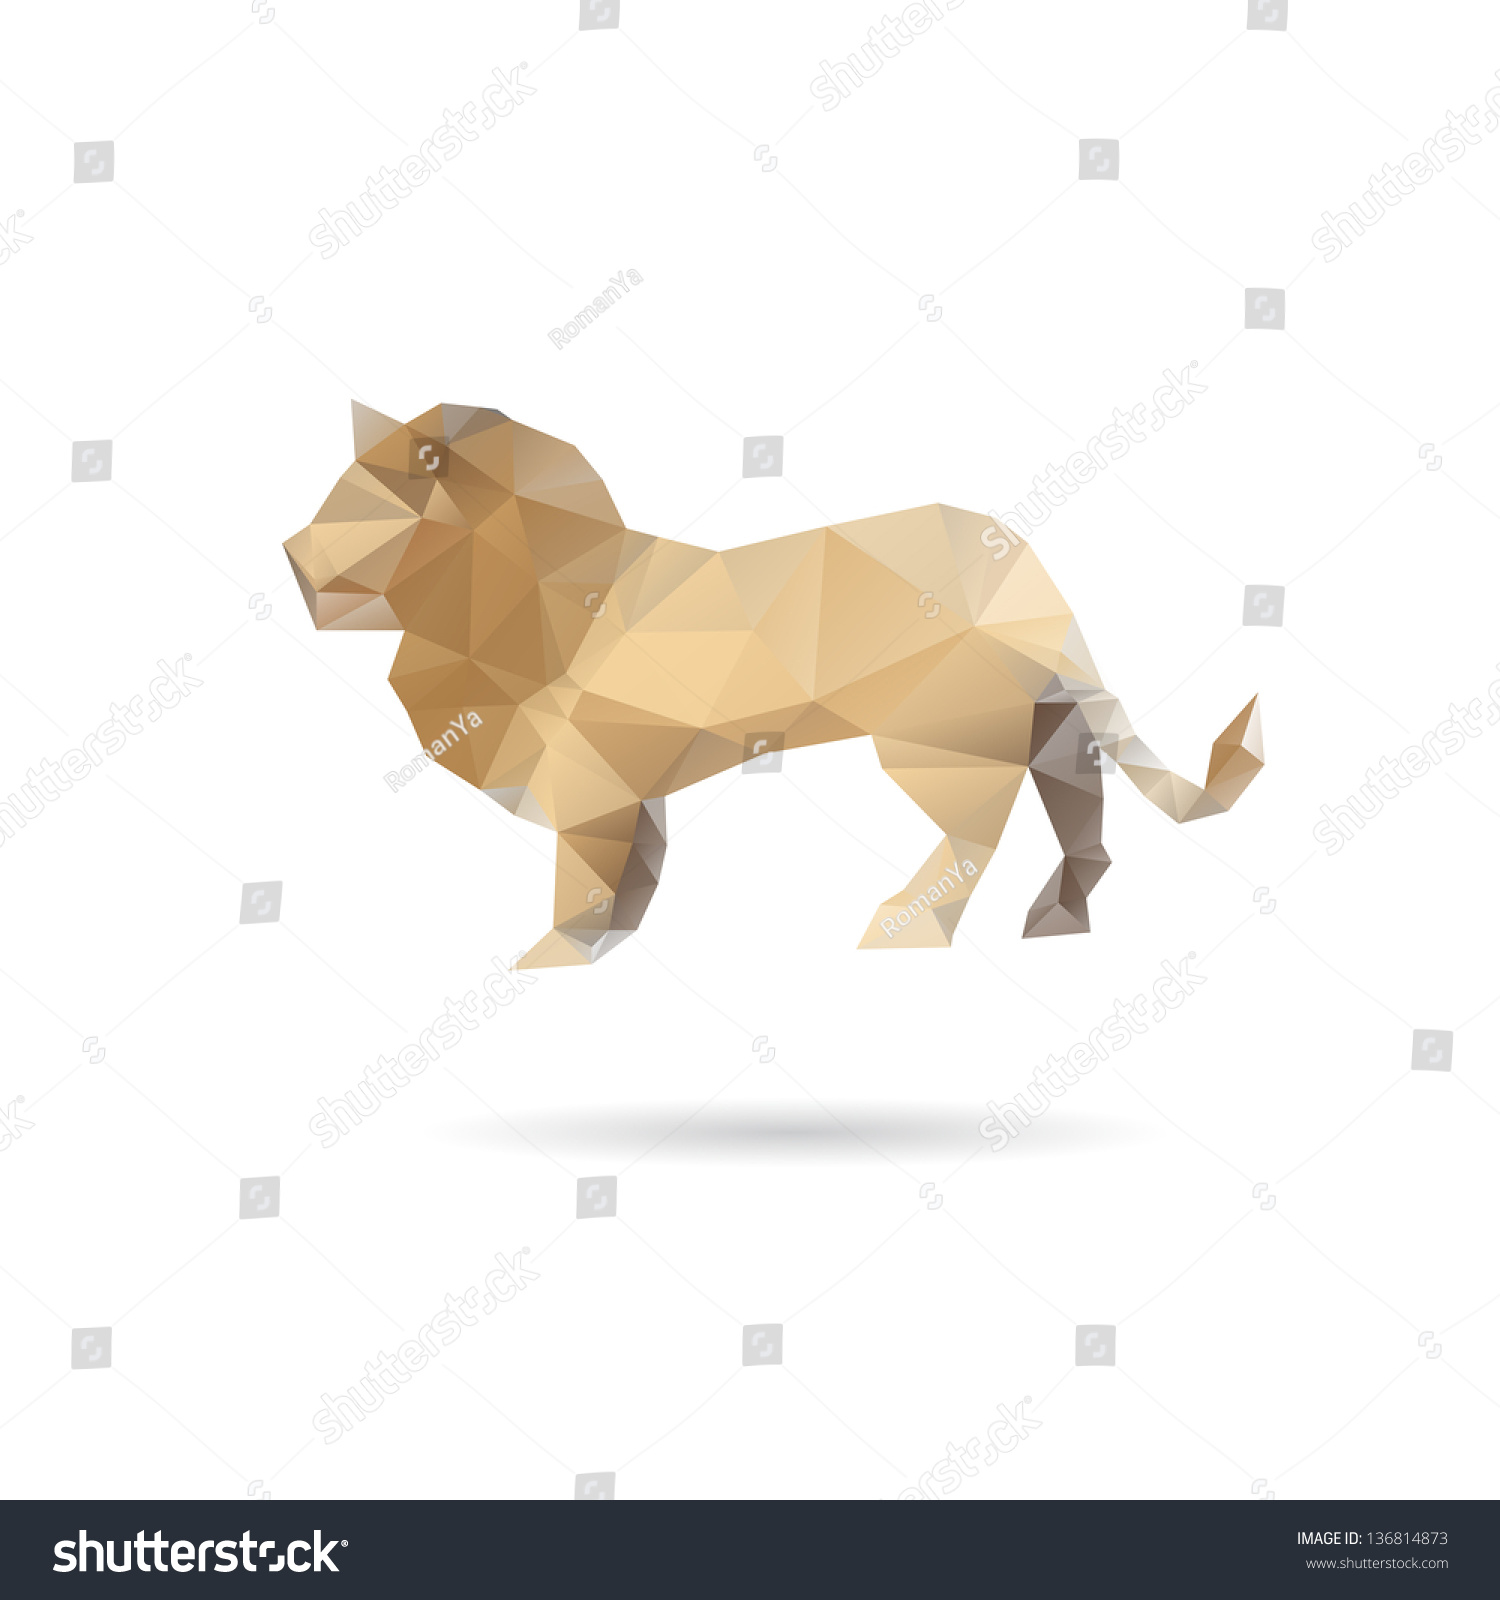 Abstract Lion Isolated On White Backgrounds Stock Vector 136814873 ...